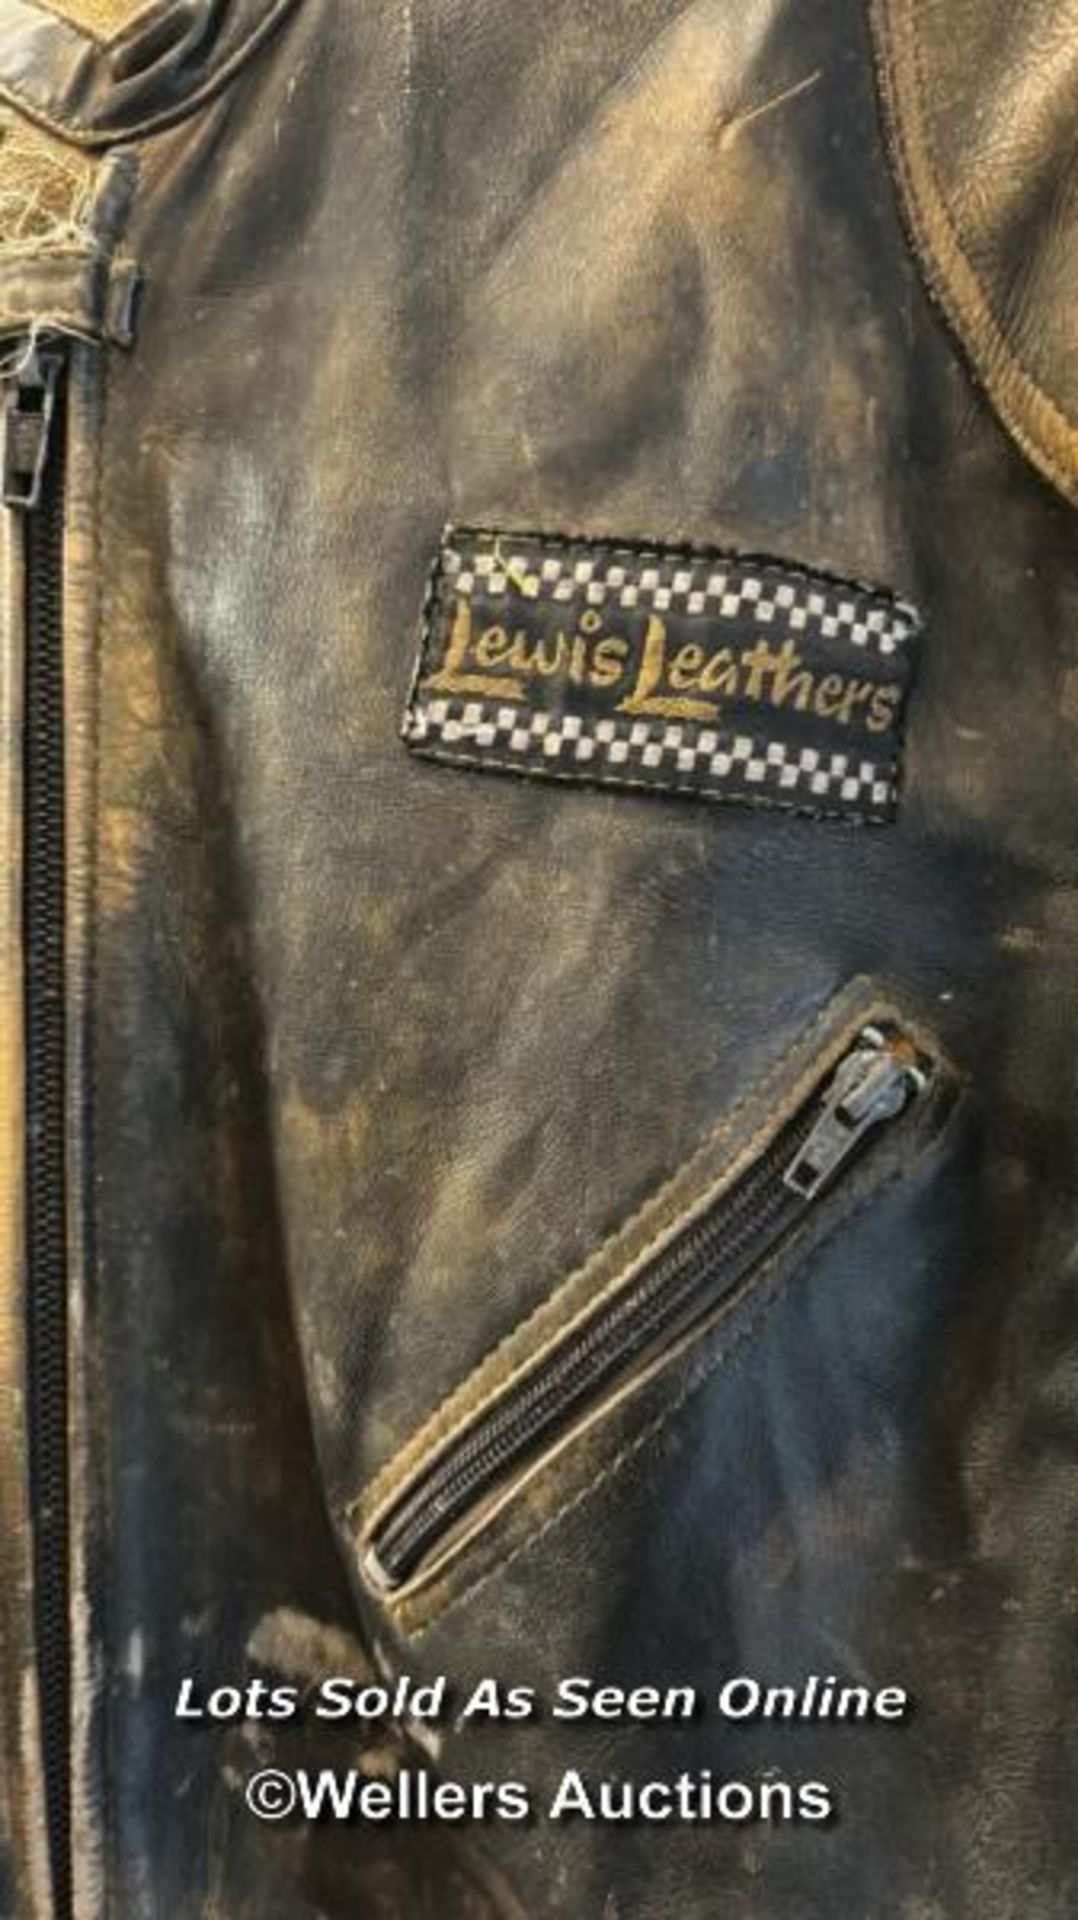 BIKERS ALL-IN-ONE LEWIS LEATHERS WITH THE NAME GRIZMOULD - Image 2 of 5